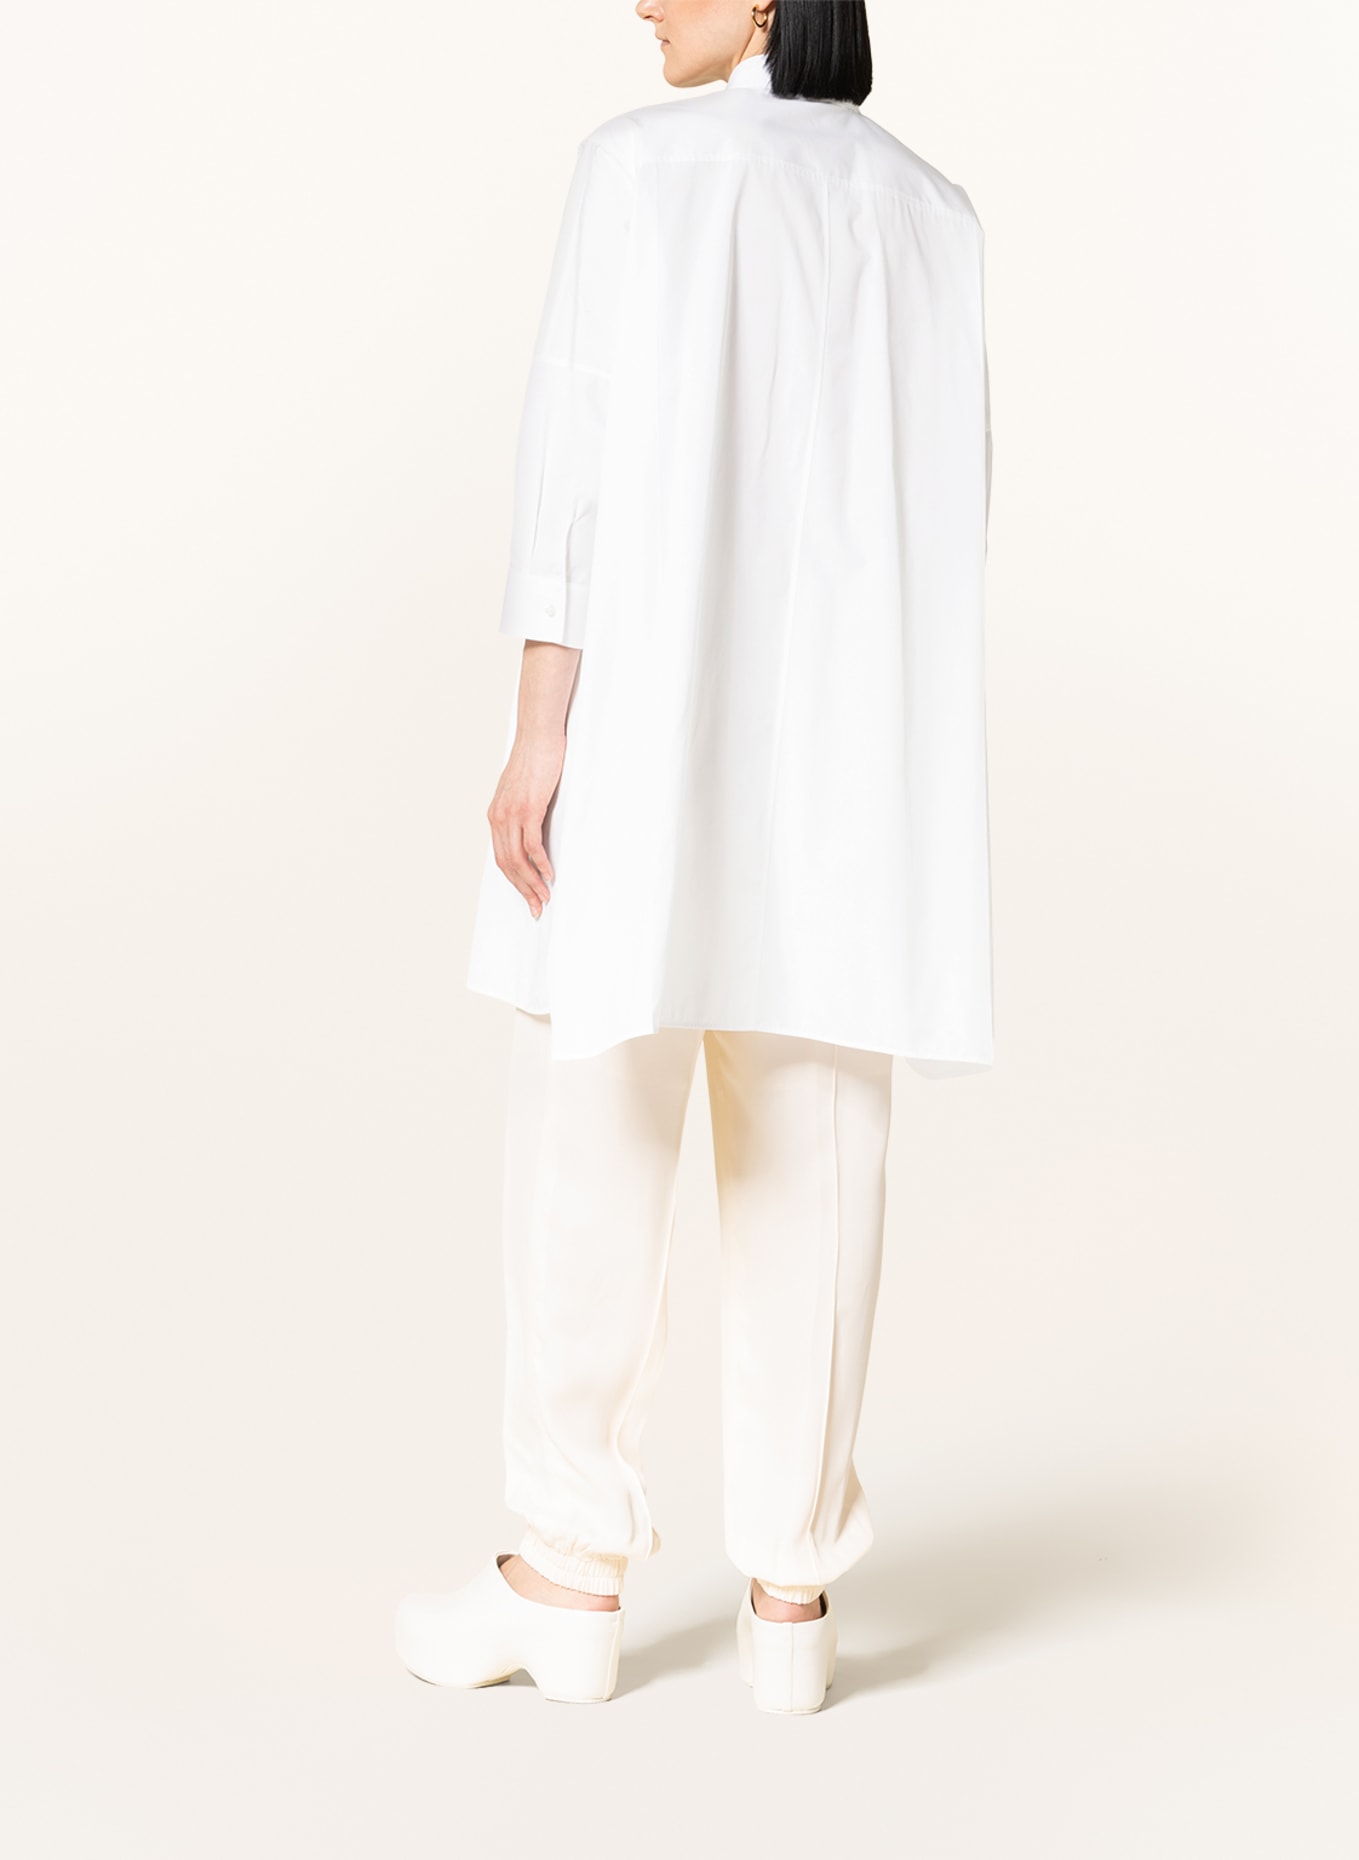 JIL SANDER Oversized shirt blouse with 3/4 sleeves, Color: WHITE (Image 3)